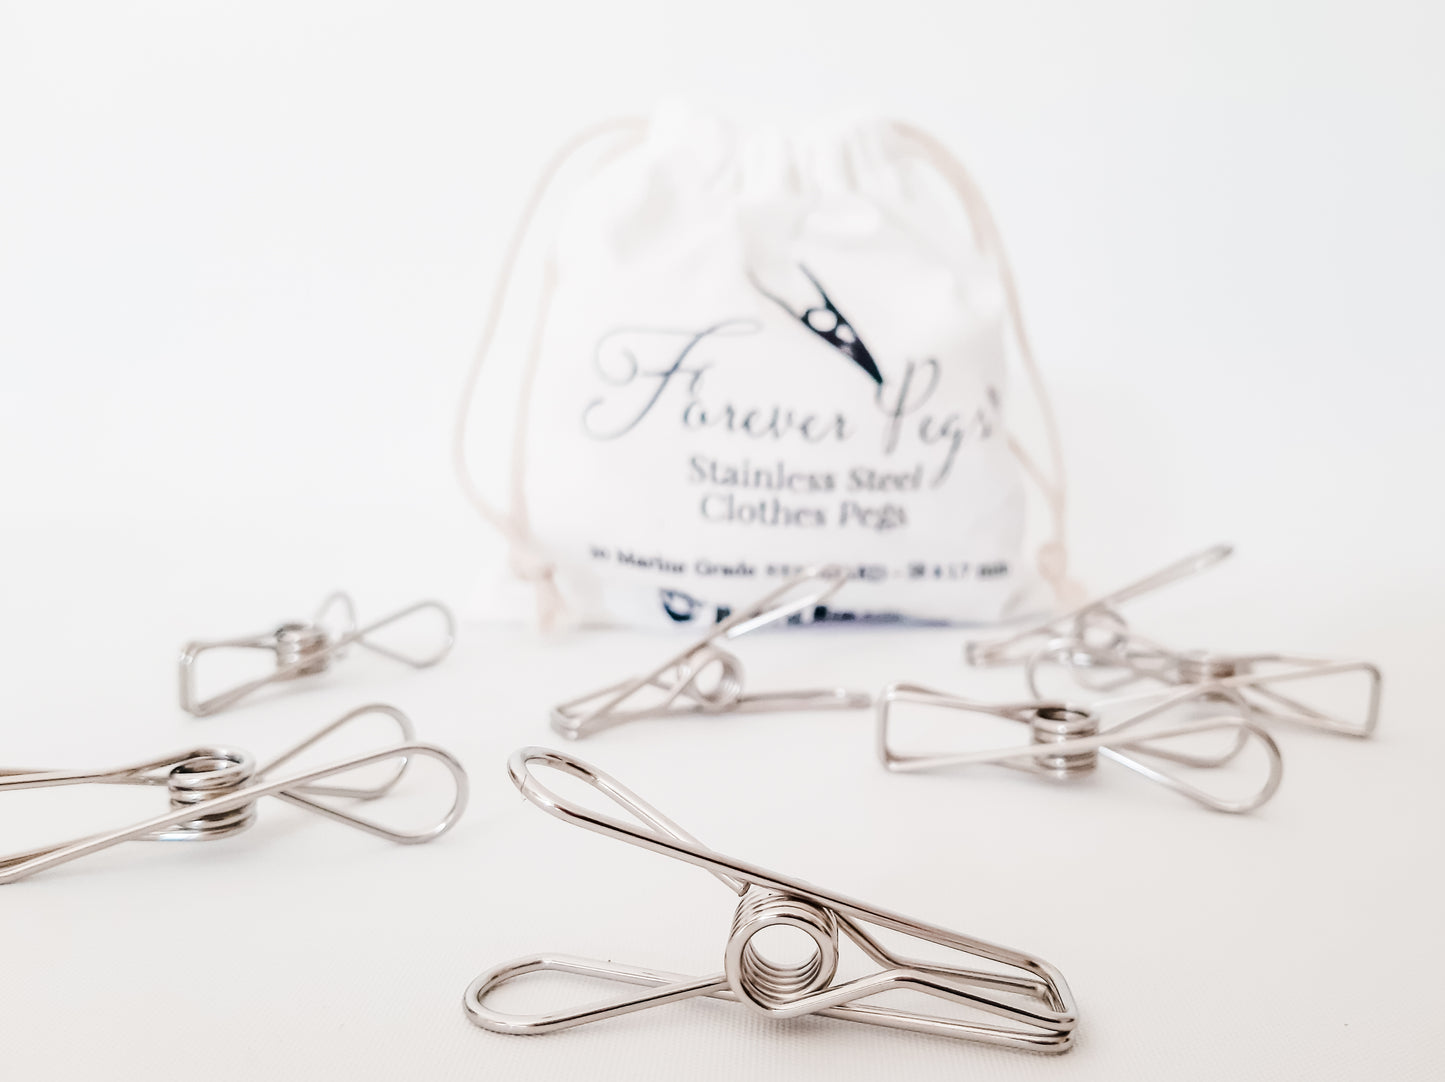 These MARINE GRADE pegs are made to last forever. Each bag has 20 stainless steel pegs.